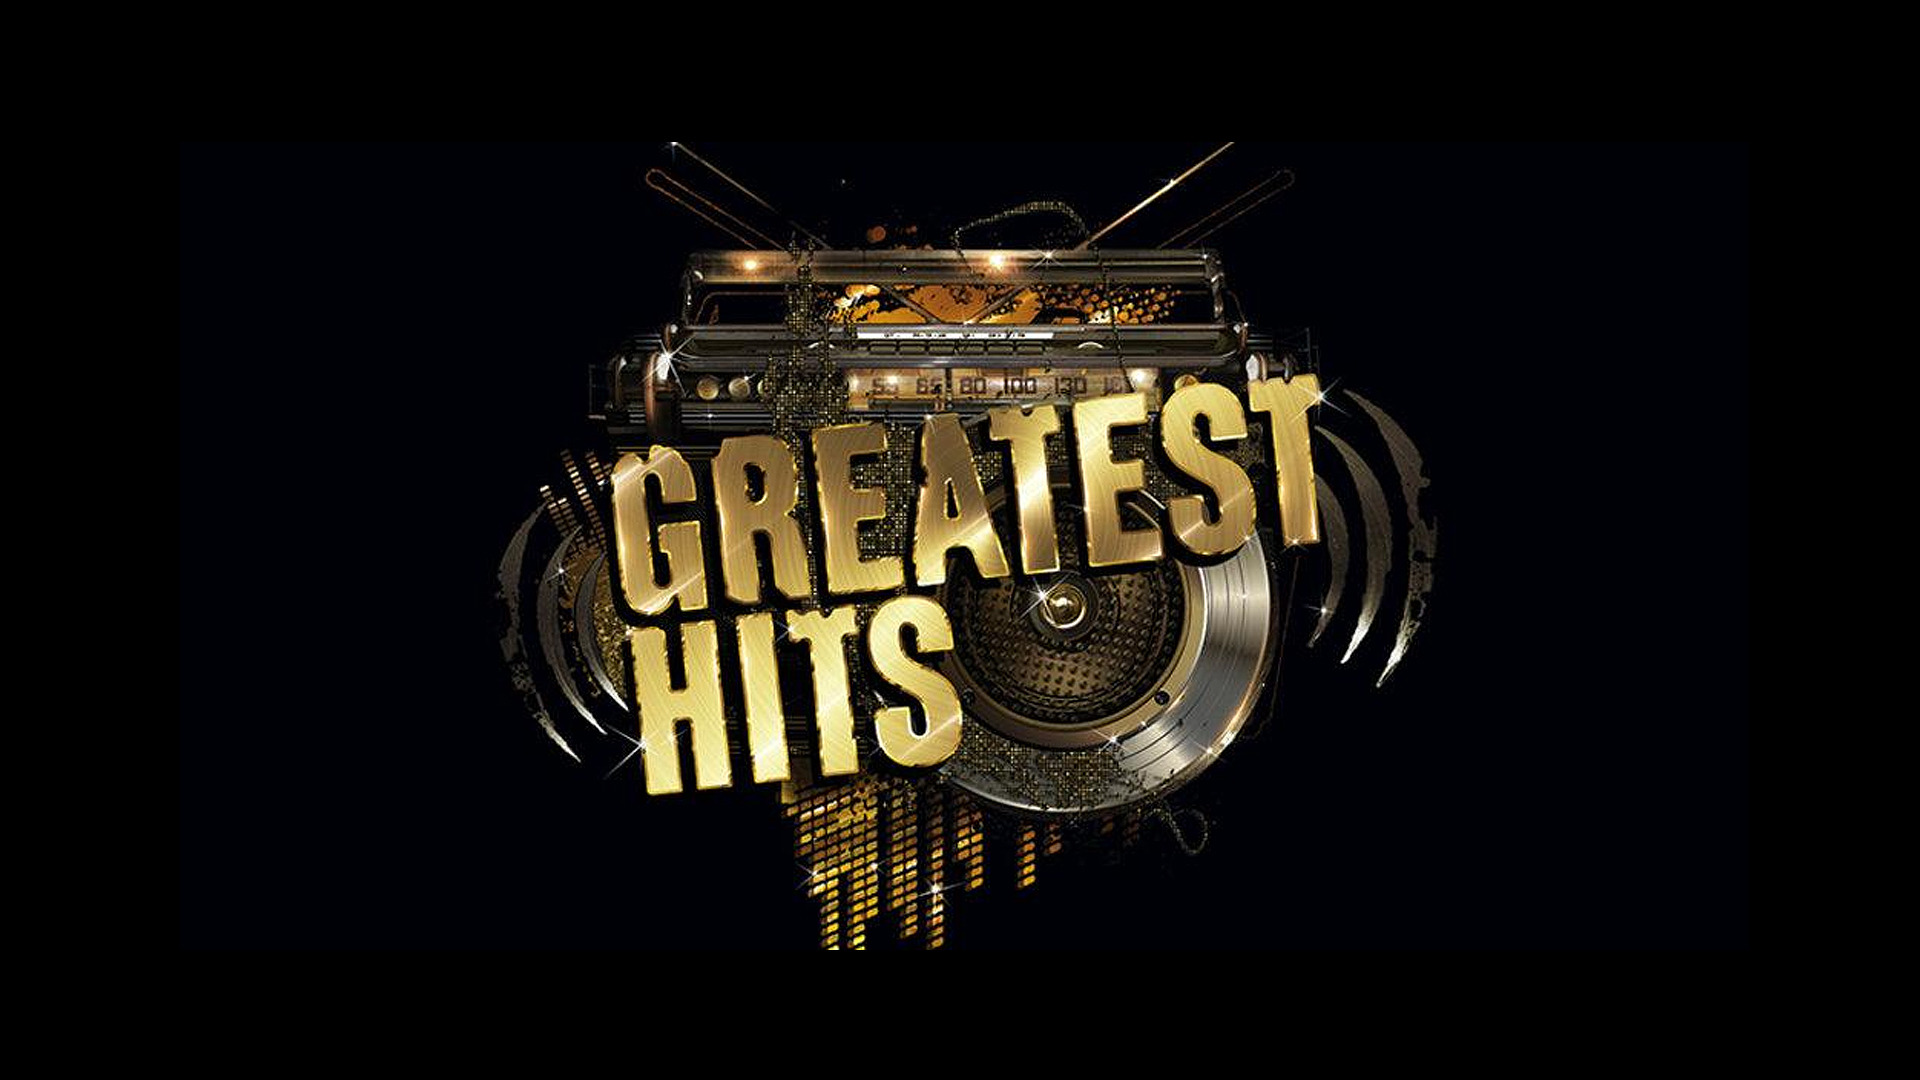 Show Greatest Hits